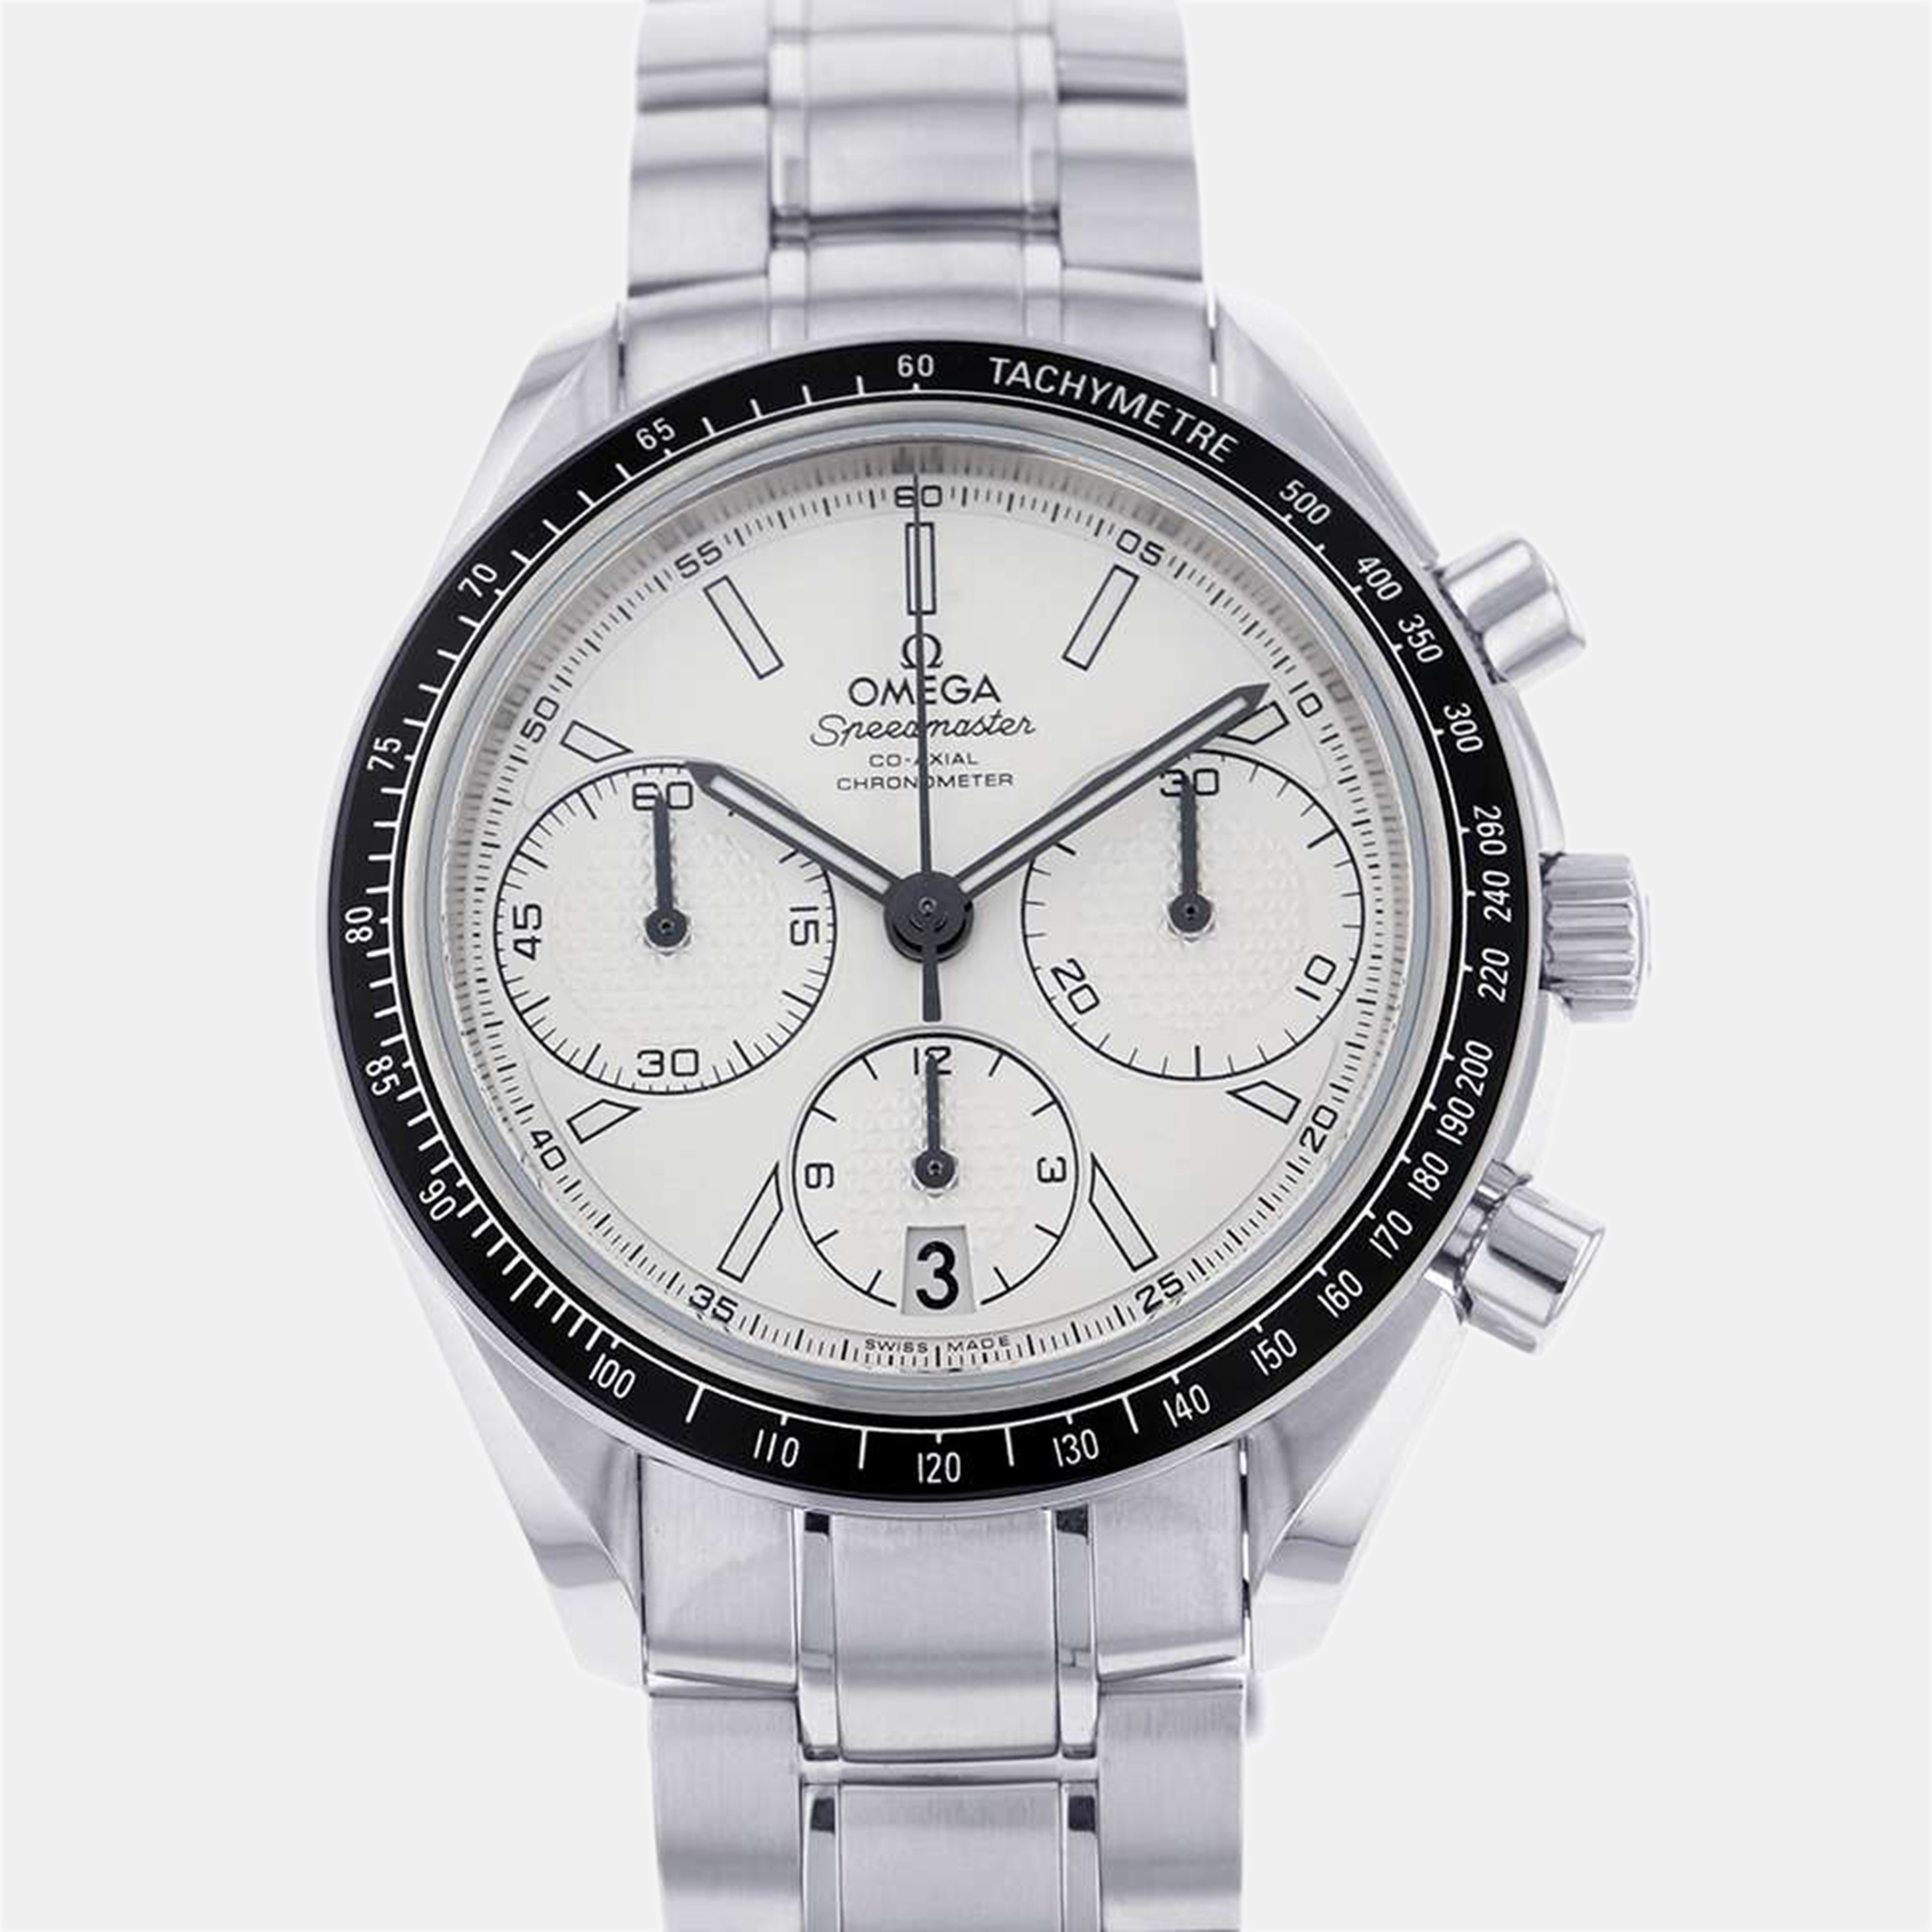 Omega Silver Stainless Steel Speedmaster 326.30.40.50.02.001 Automatic Men's Wristwatch 40 Mm